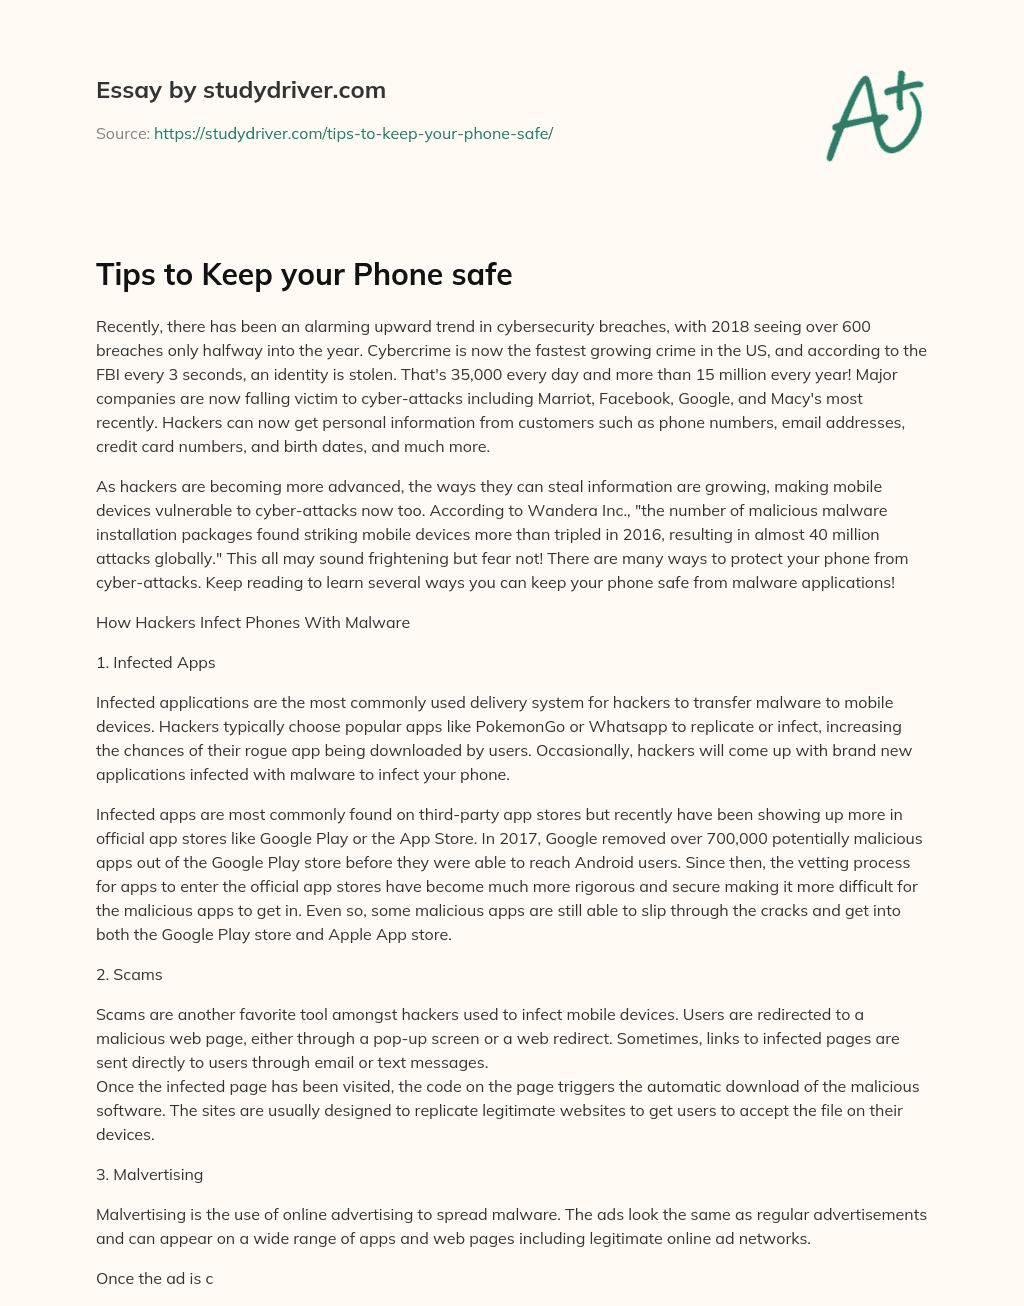 Tips to Keep your Phone Safe essay